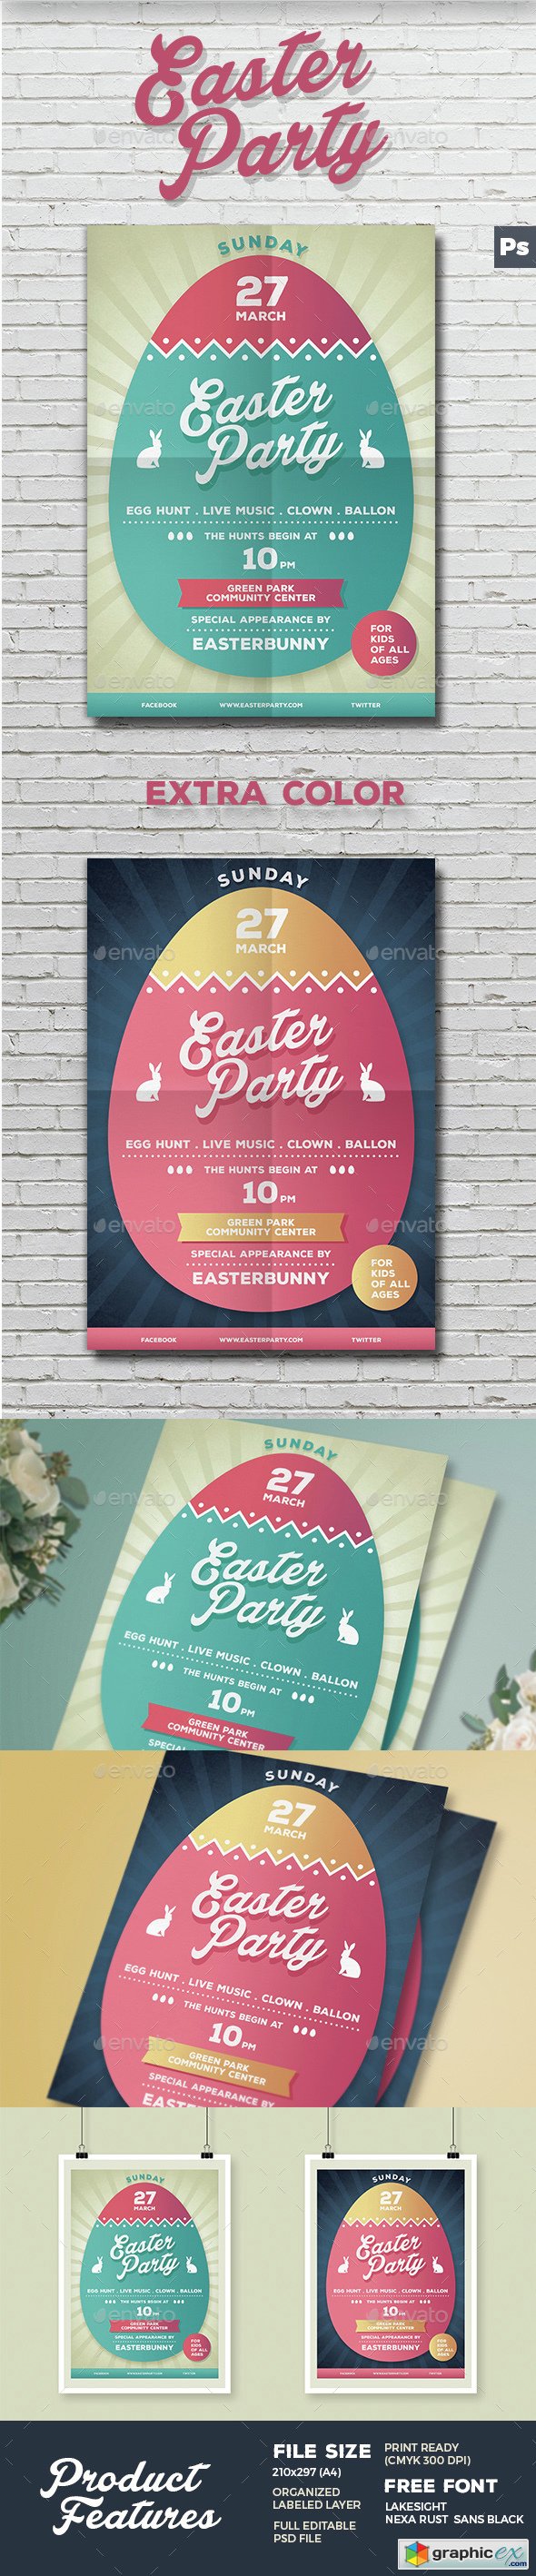 Easter Party Flyer Poster